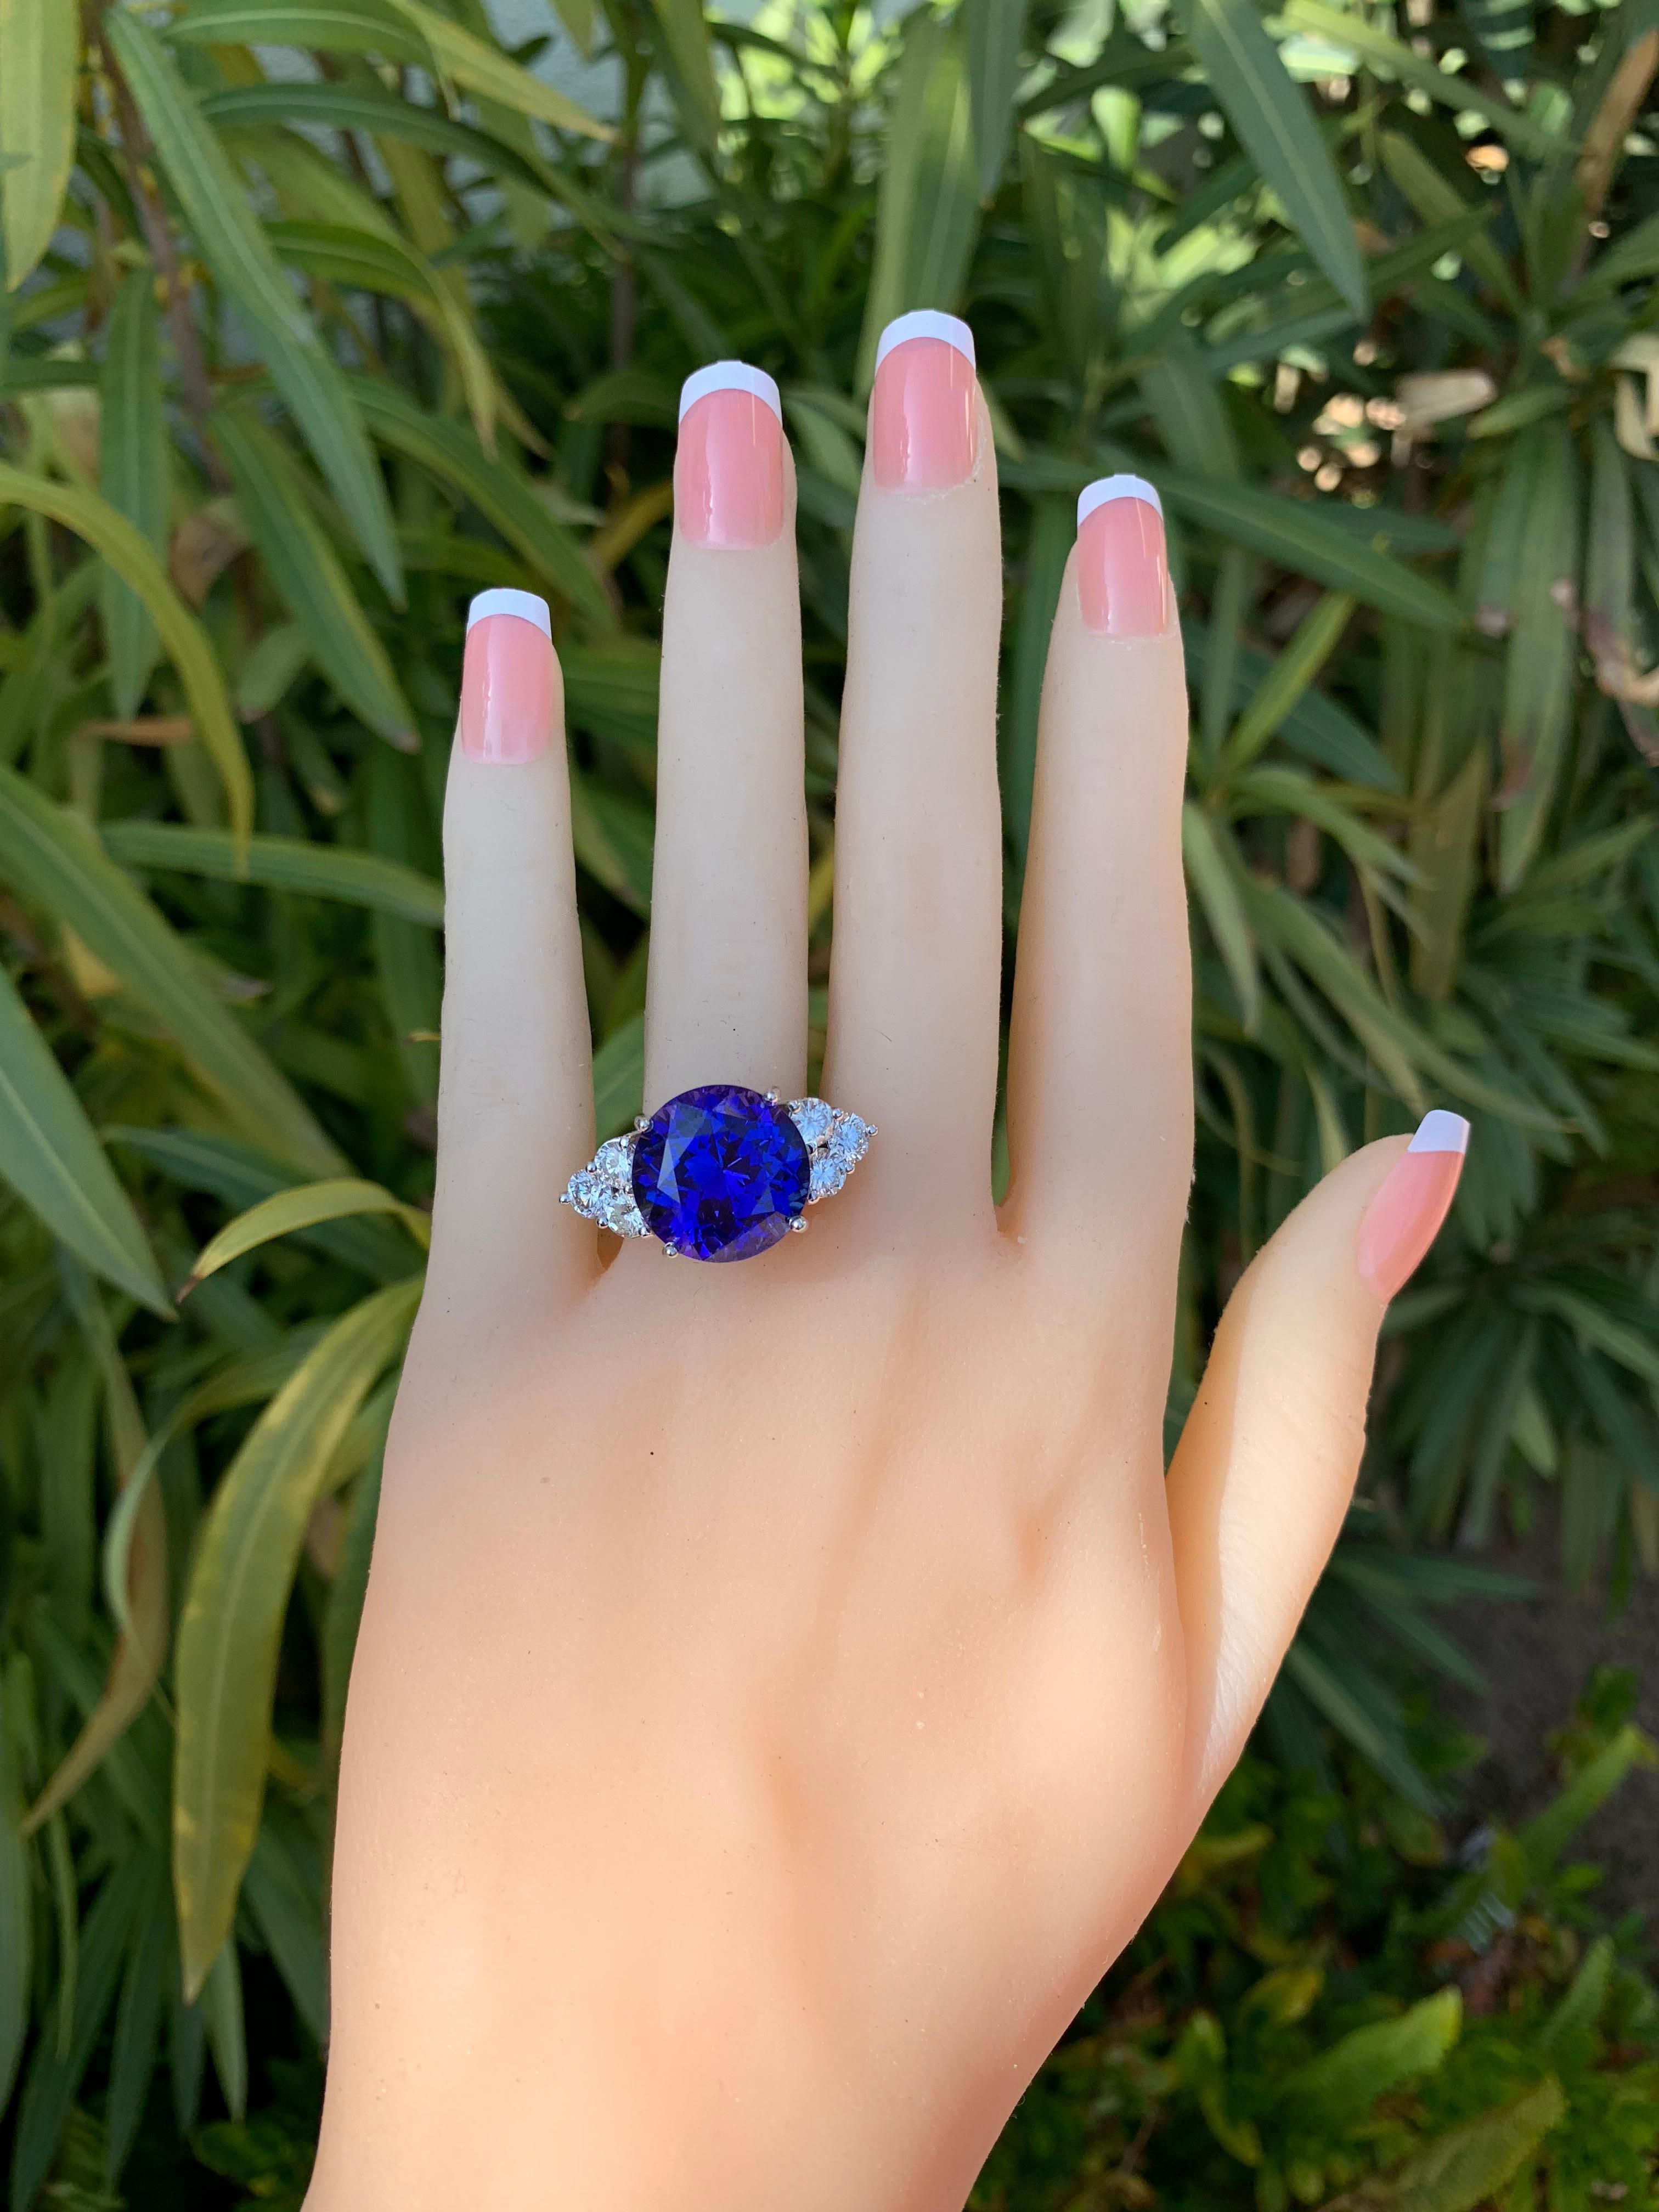 If you would like to see videos of this piece please message me.

Stunning 14.92 ct vivid blue round ideally cut Round Tanzanite with flashes of violet. Set in a hand designed 18k White Gold ring with scroll gallery design. 

The stone is enhanced